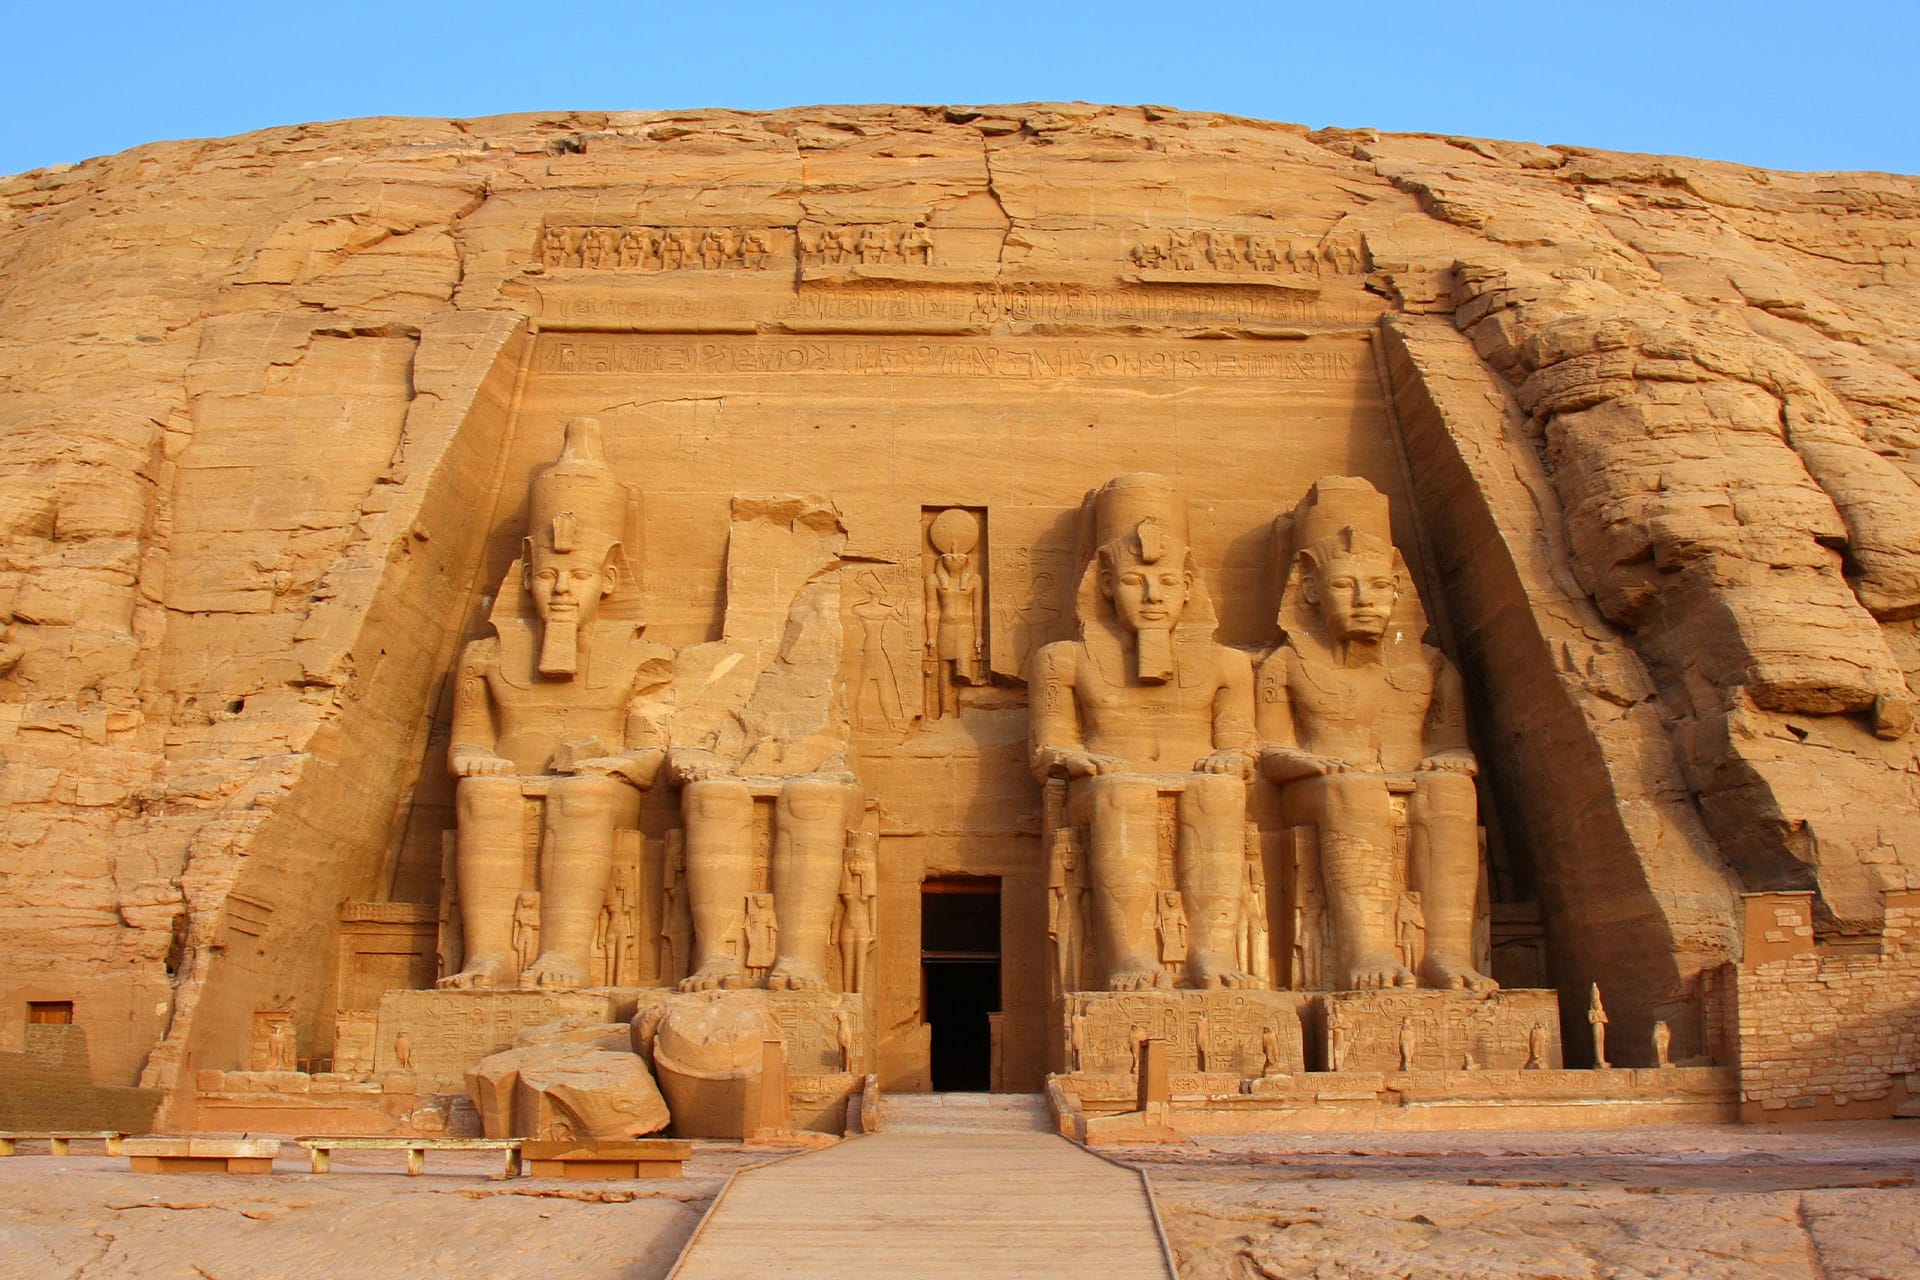 The Abu Simbel temples built by the great pharaoh Rameses II – one of the top attractions in Egypt.